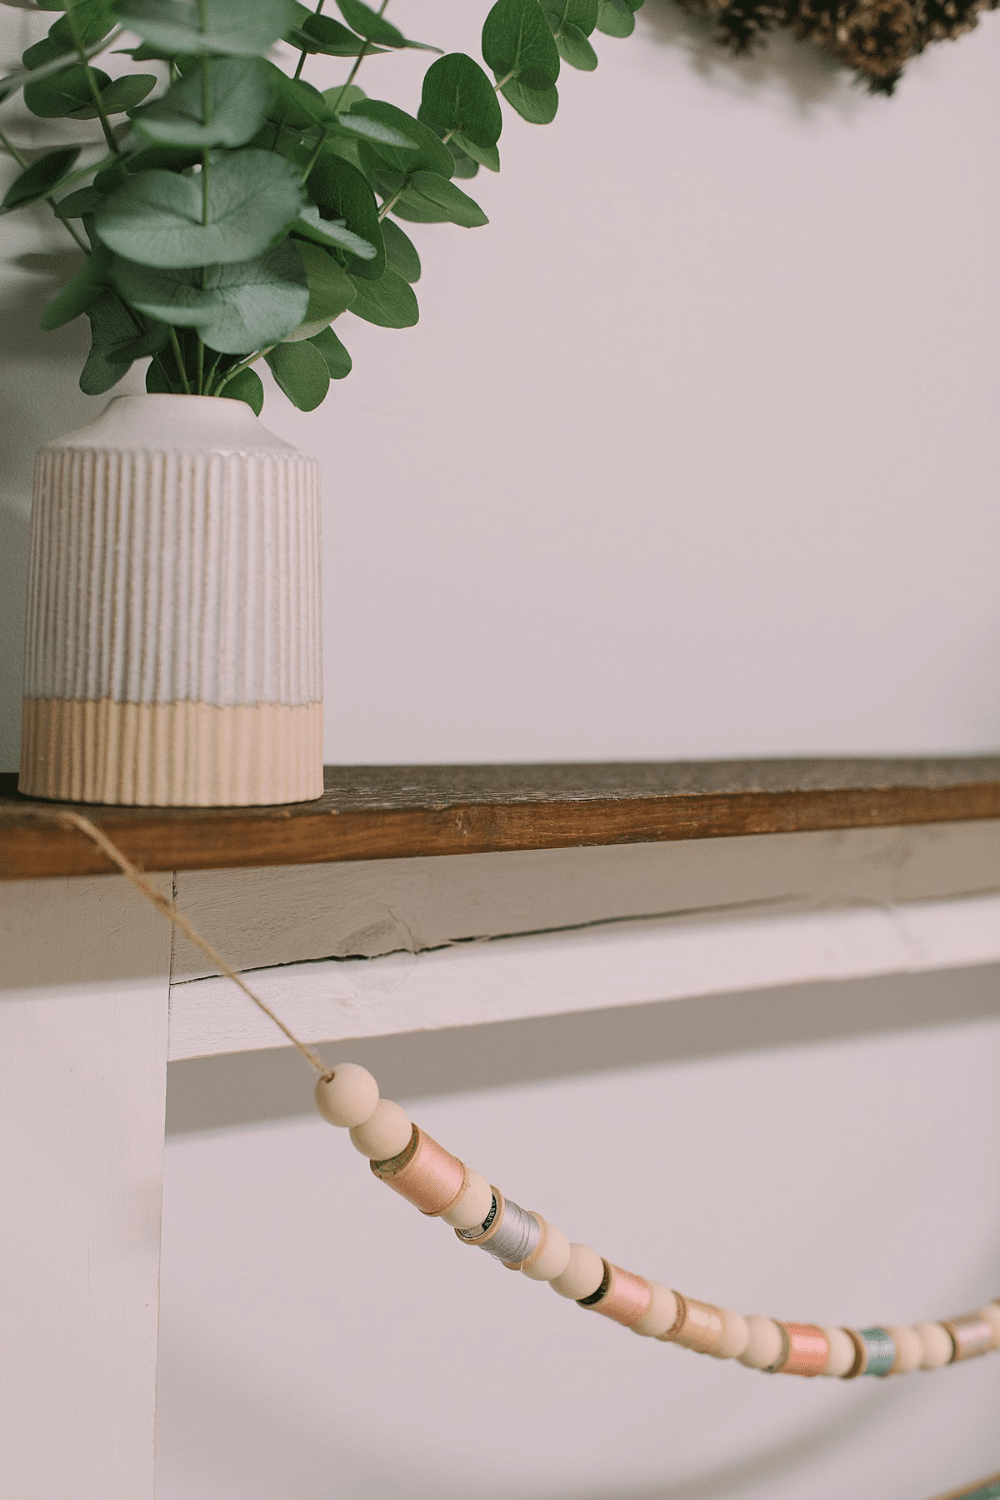 How to Make a Garland for Spring with Wood Beads and Spools of Thread